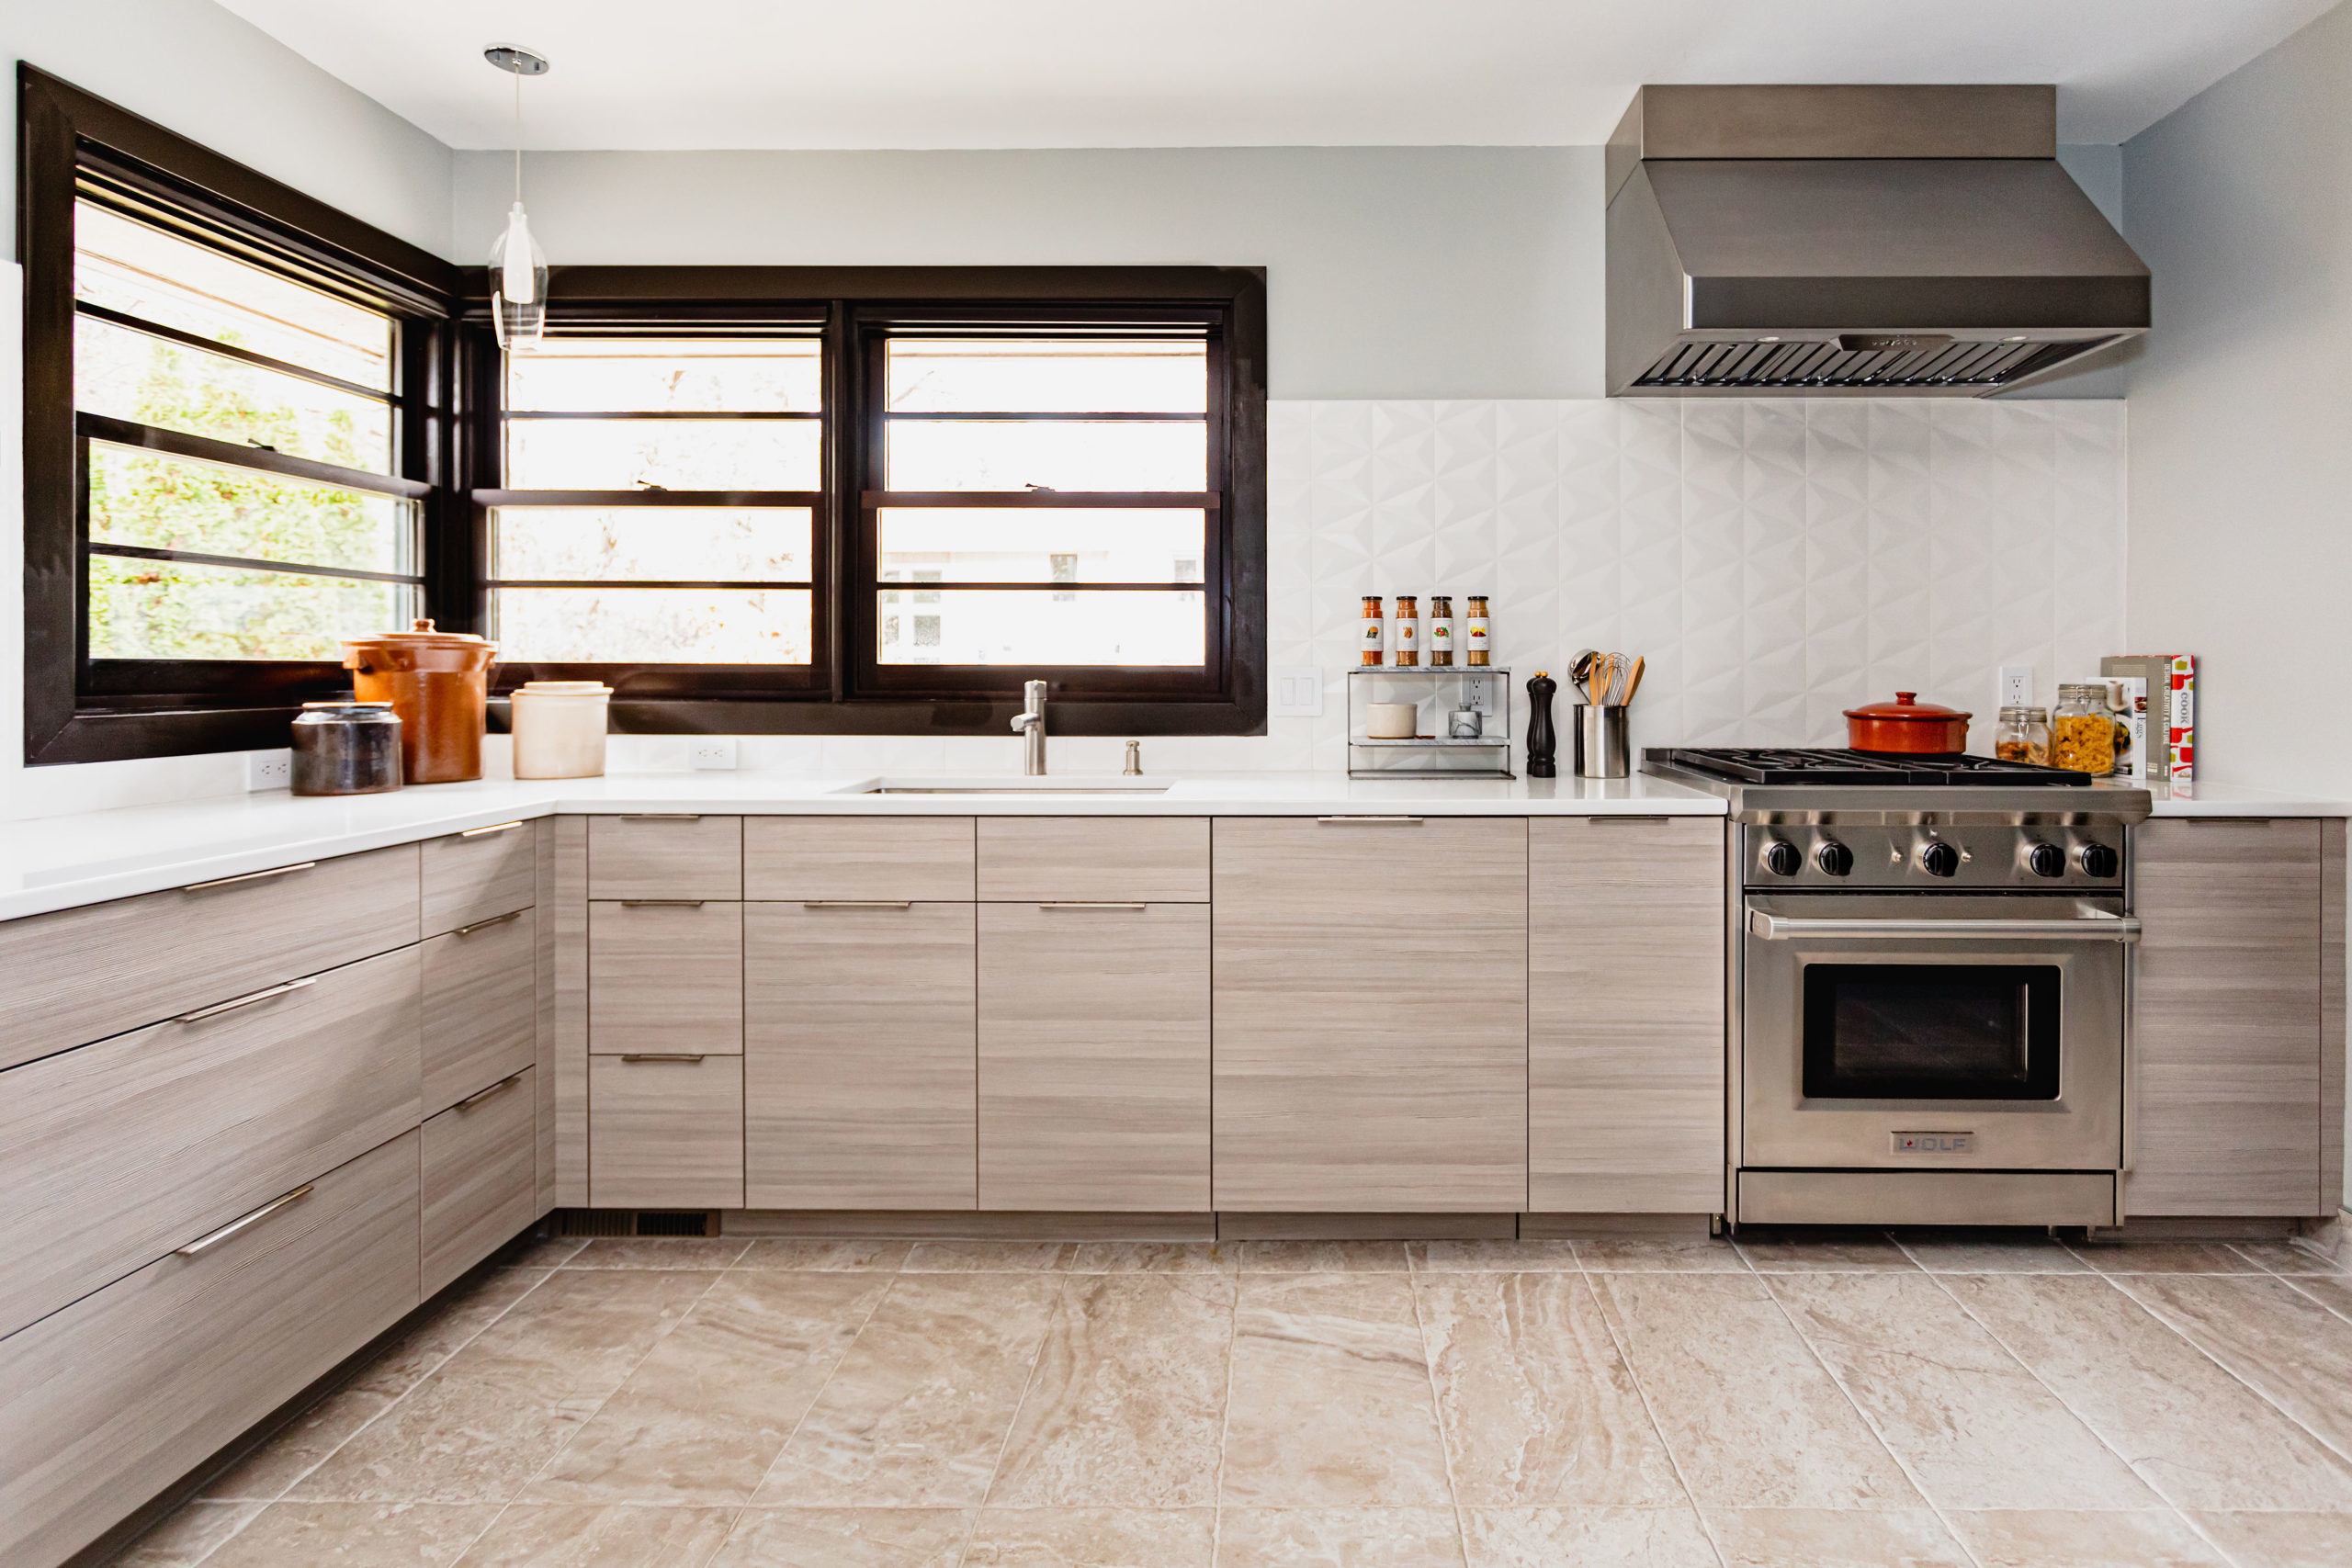 Horizontal line cabinetry trend